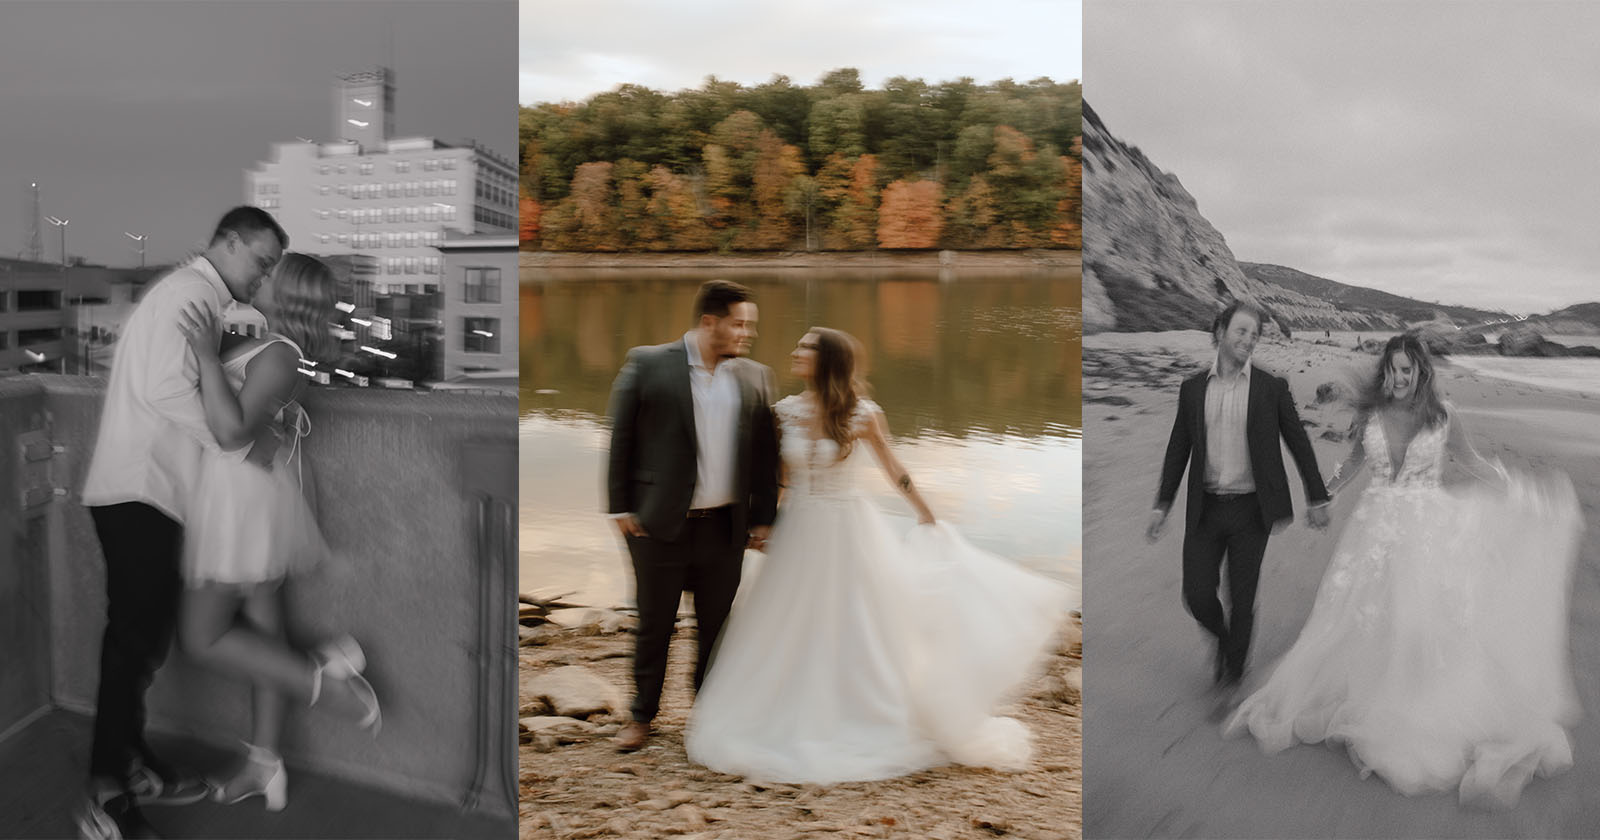 Wedding Photographer Says More Clients are Requesting Blurry Pictures